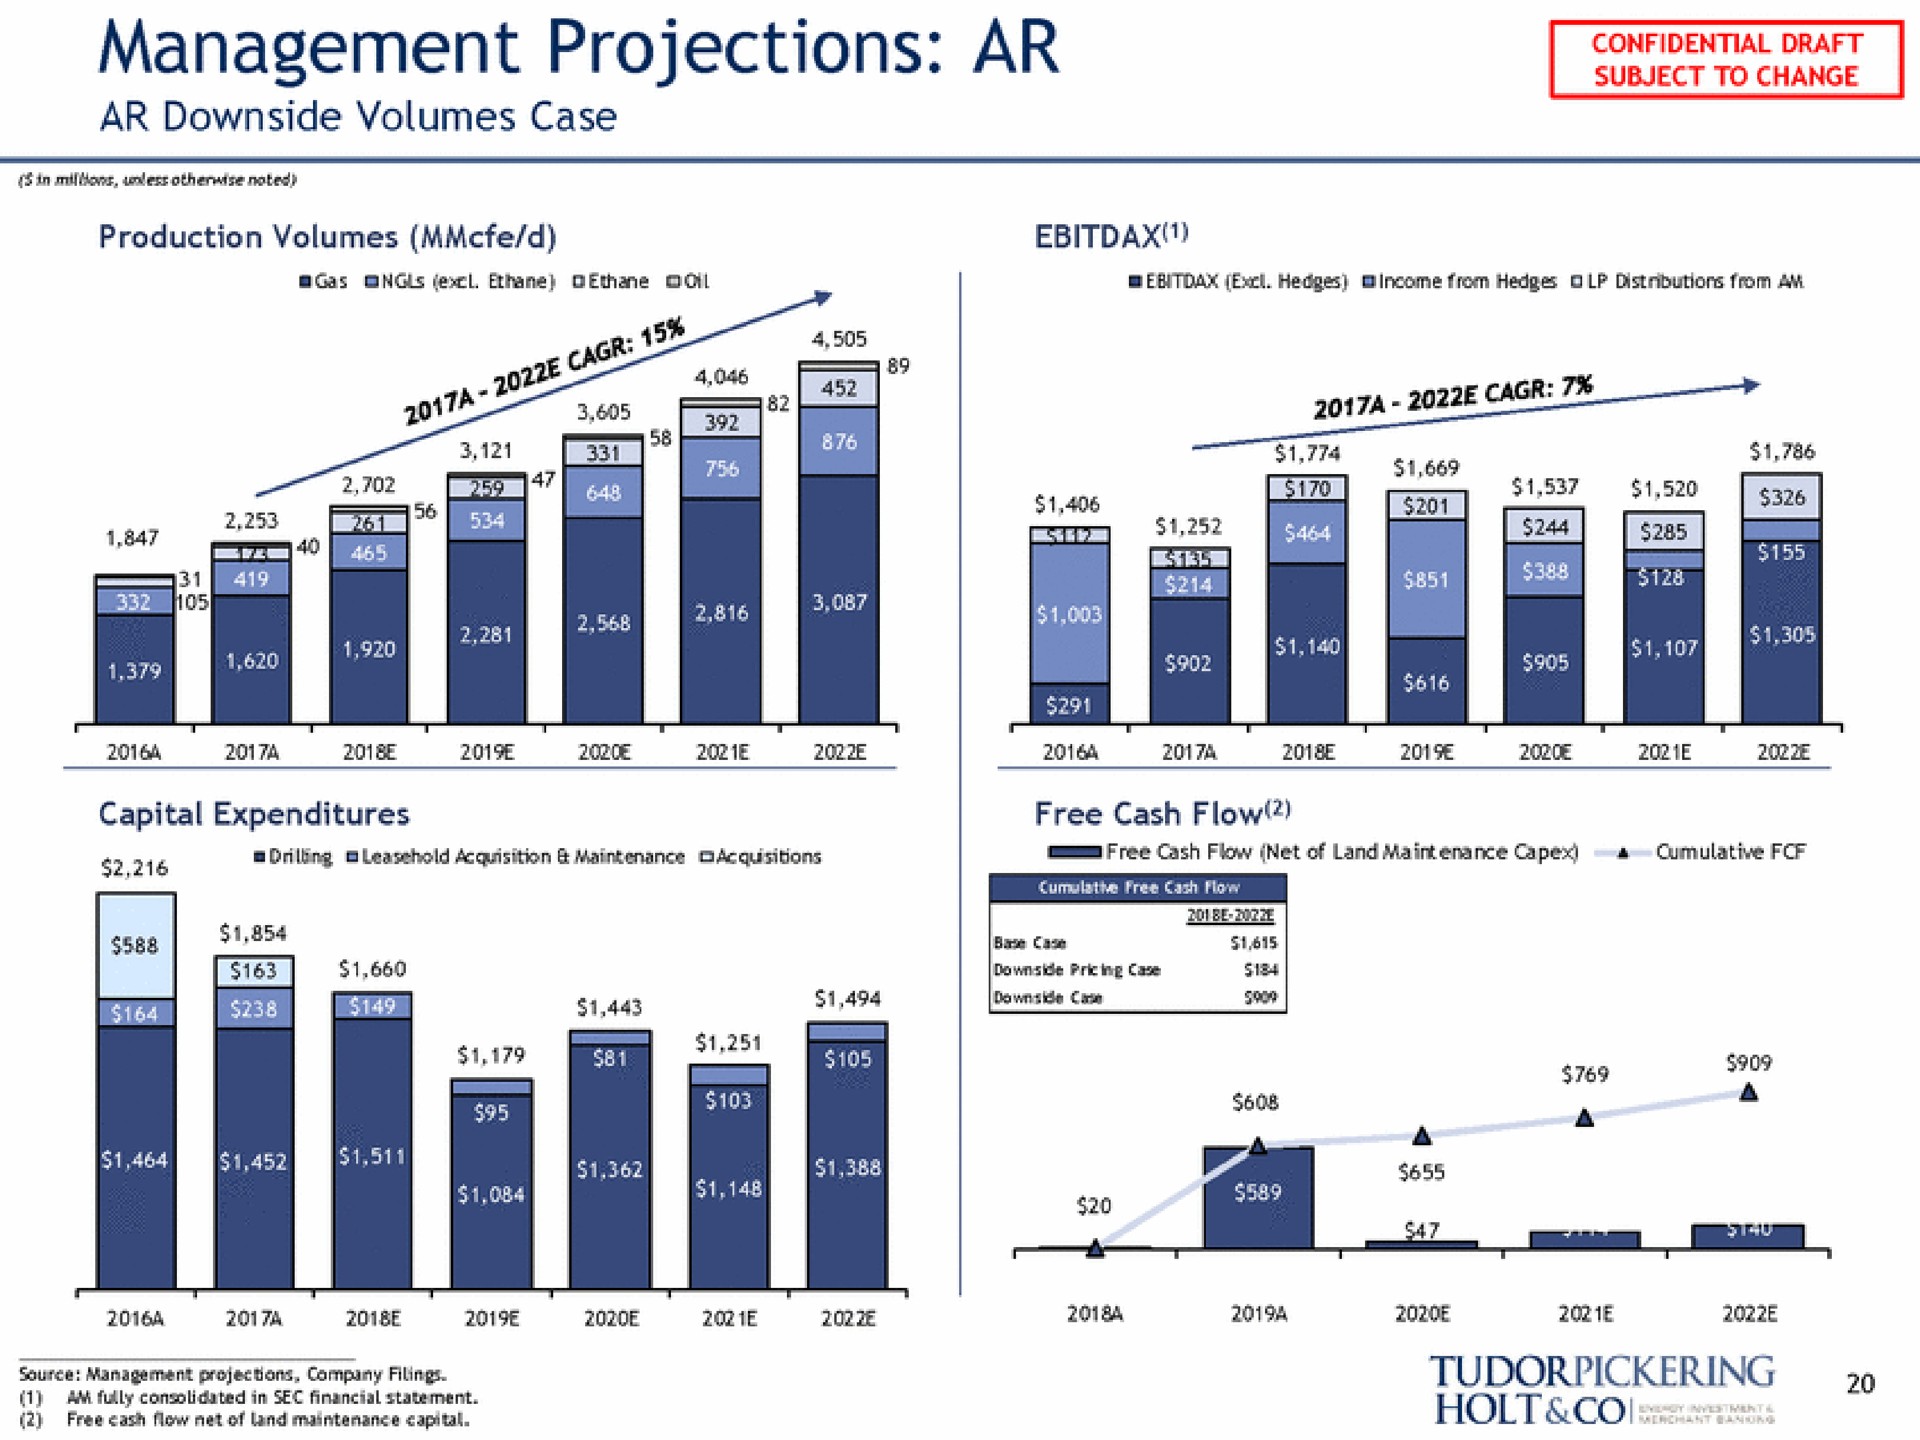 management projections source management projections company filings a | Tudor, Pickering, Holt & Co